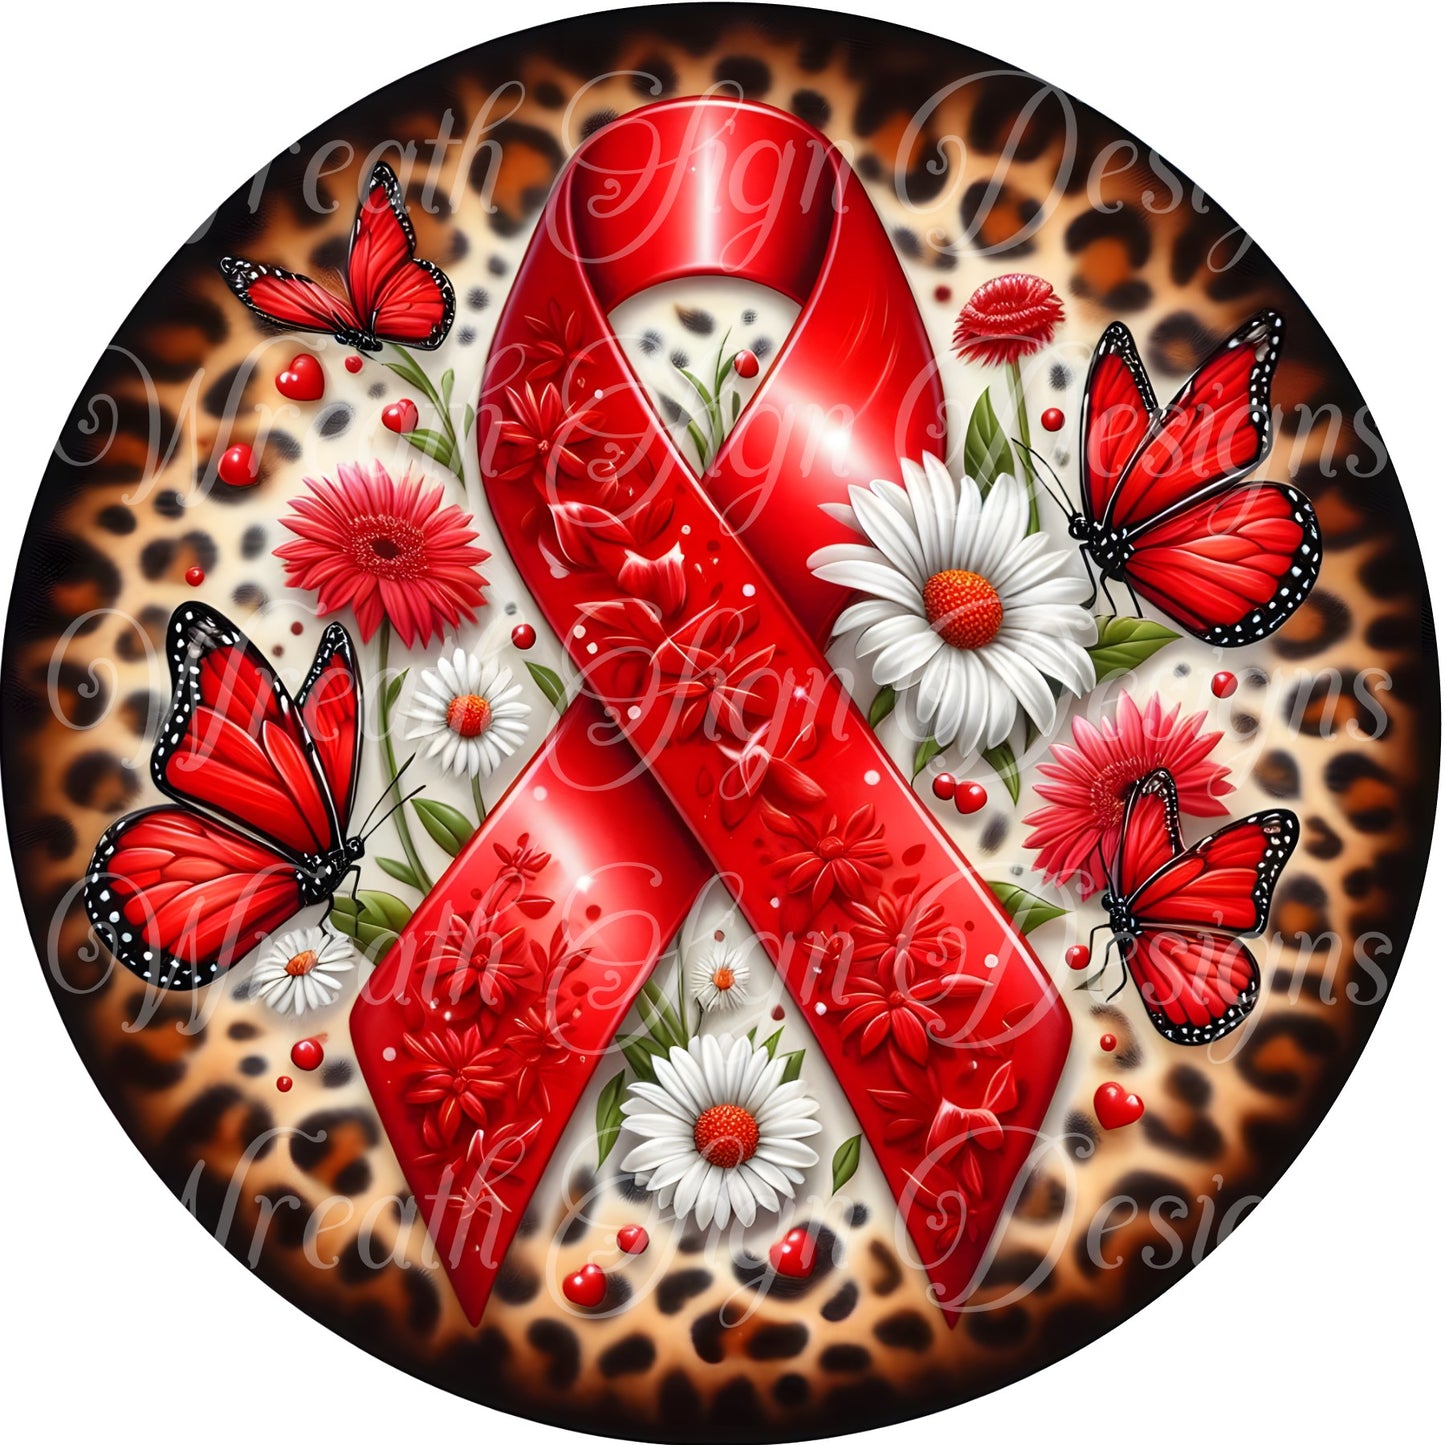 AIDS, Multiple Sclerosis, drunk driving and drug prevention awareness ribbon wreath sign, Red awareness ribbon wreath attachment